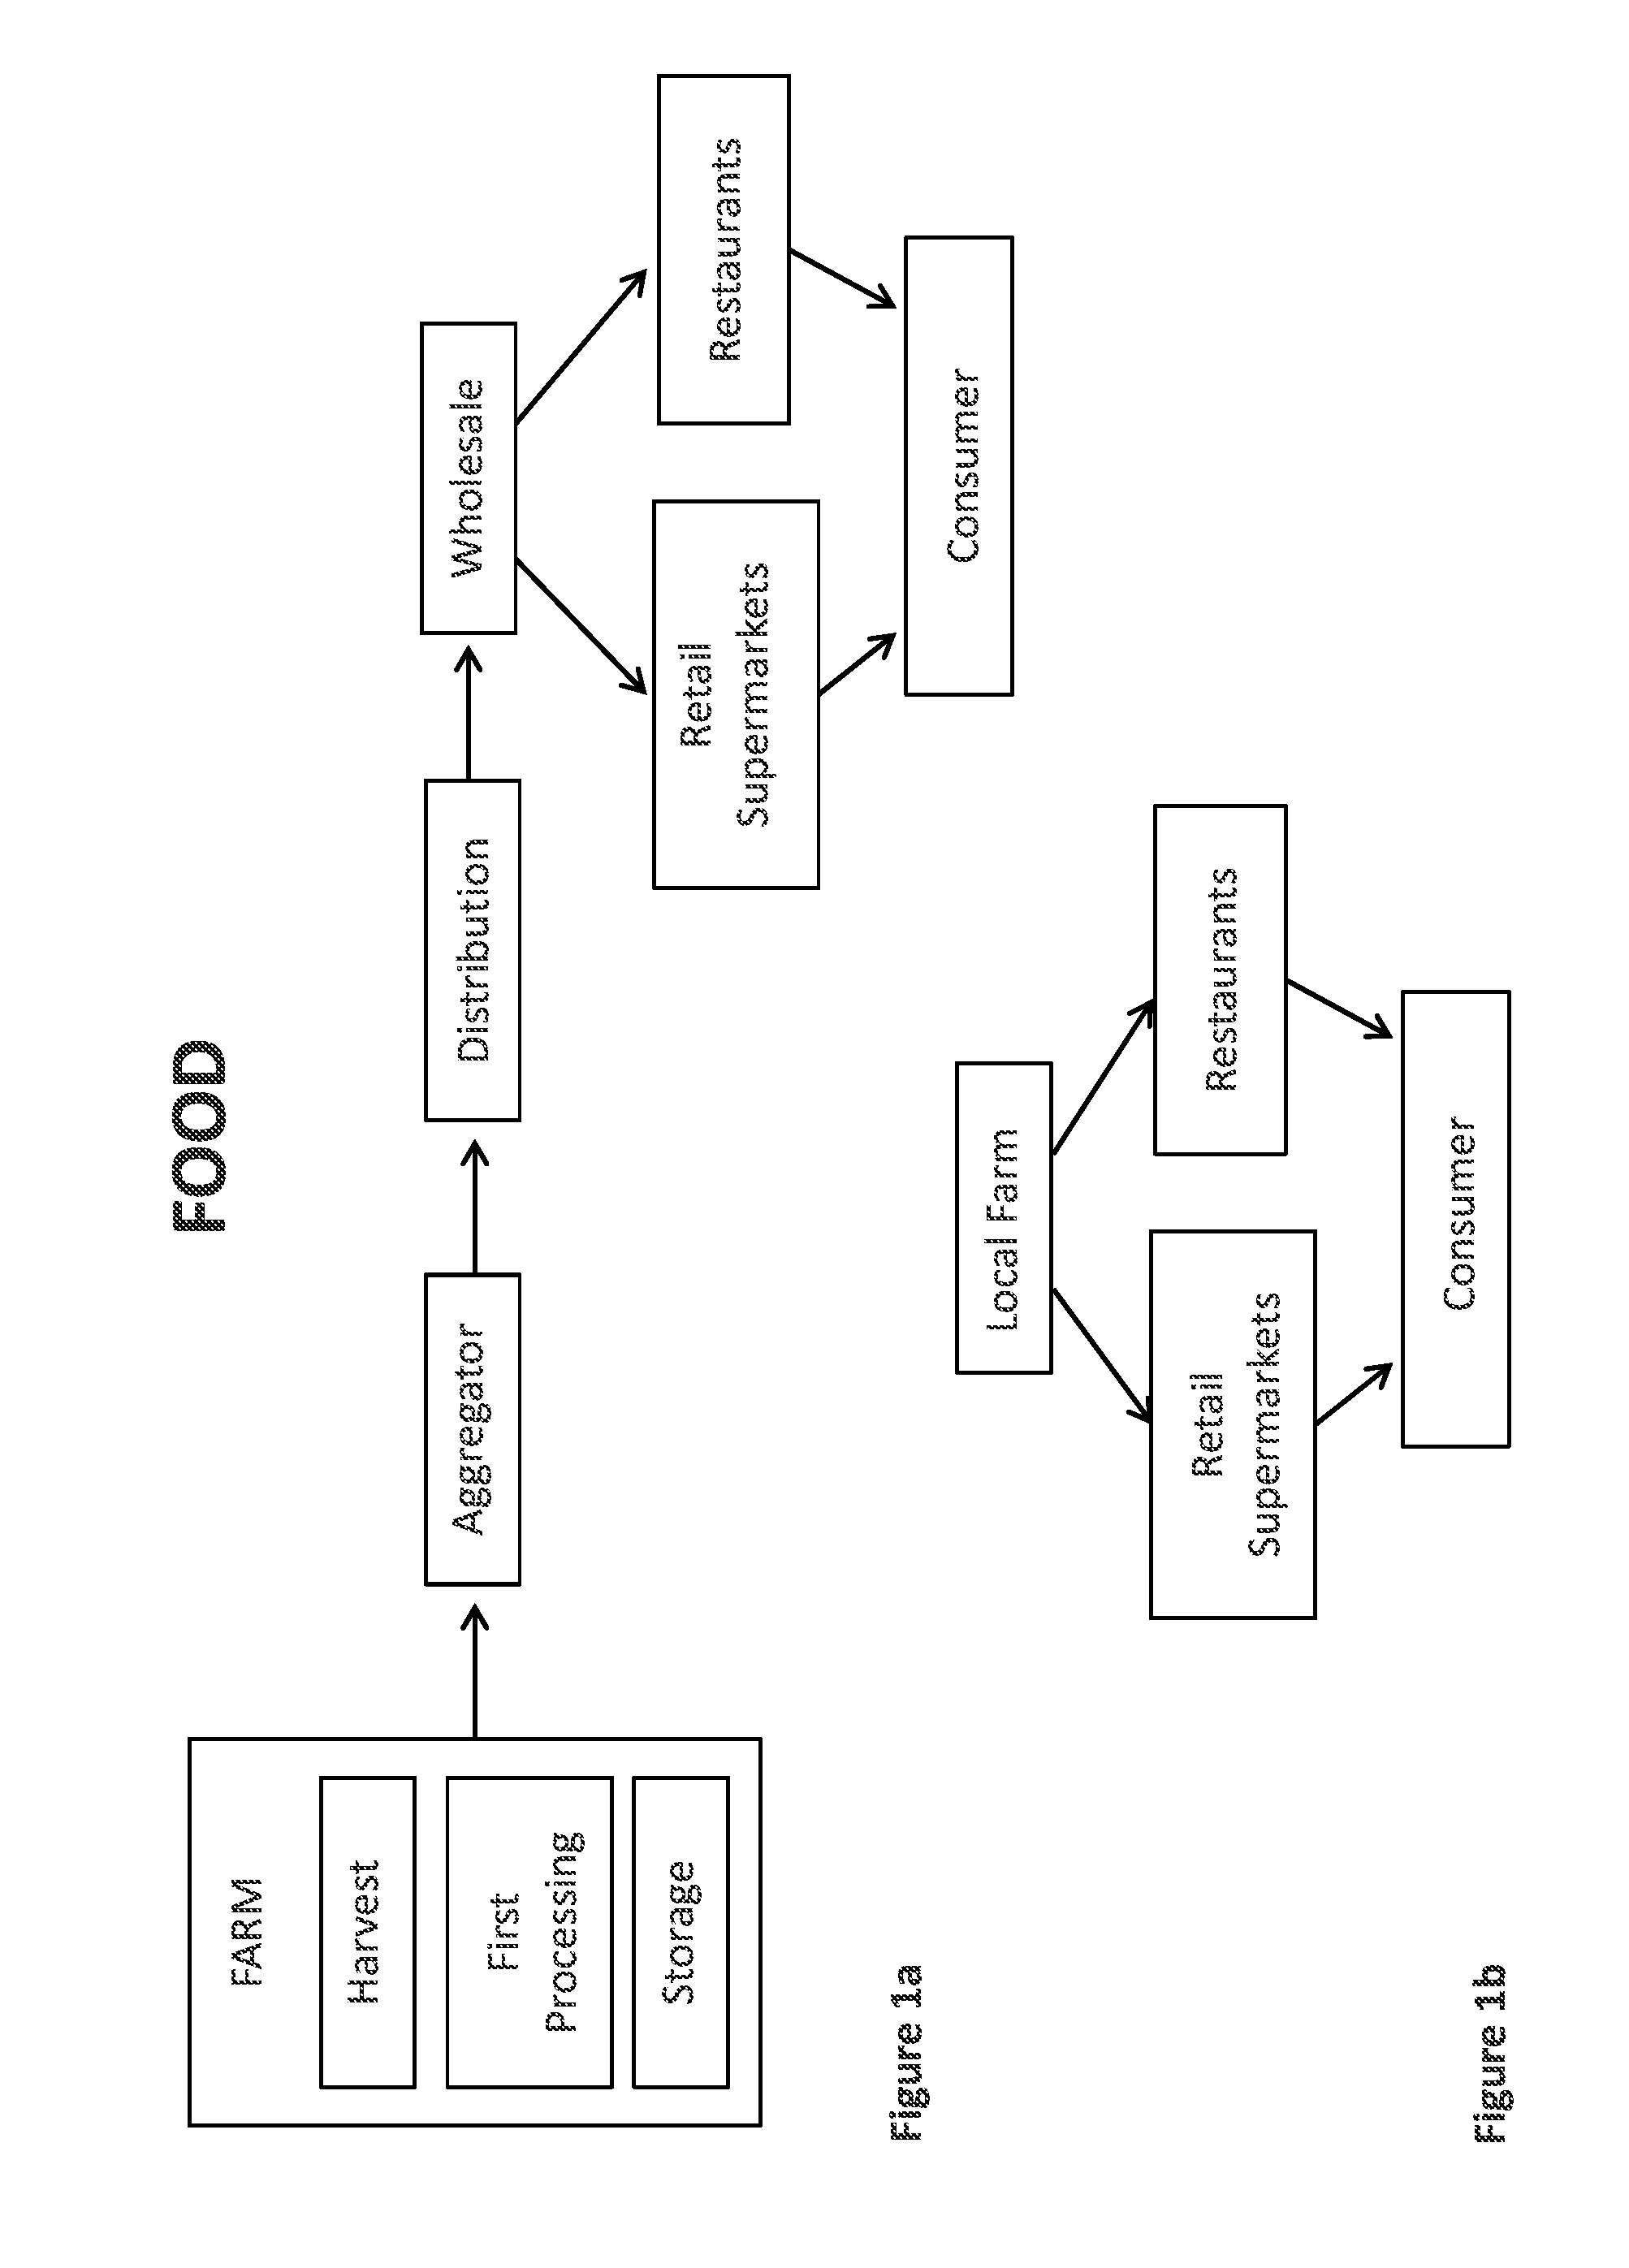 Microprocessor-controlled microfluidic platform for pathogen, toxin, biomarker, and chemical detection with removable updatable sensor array for food and water safety, medical, and laboratory applications